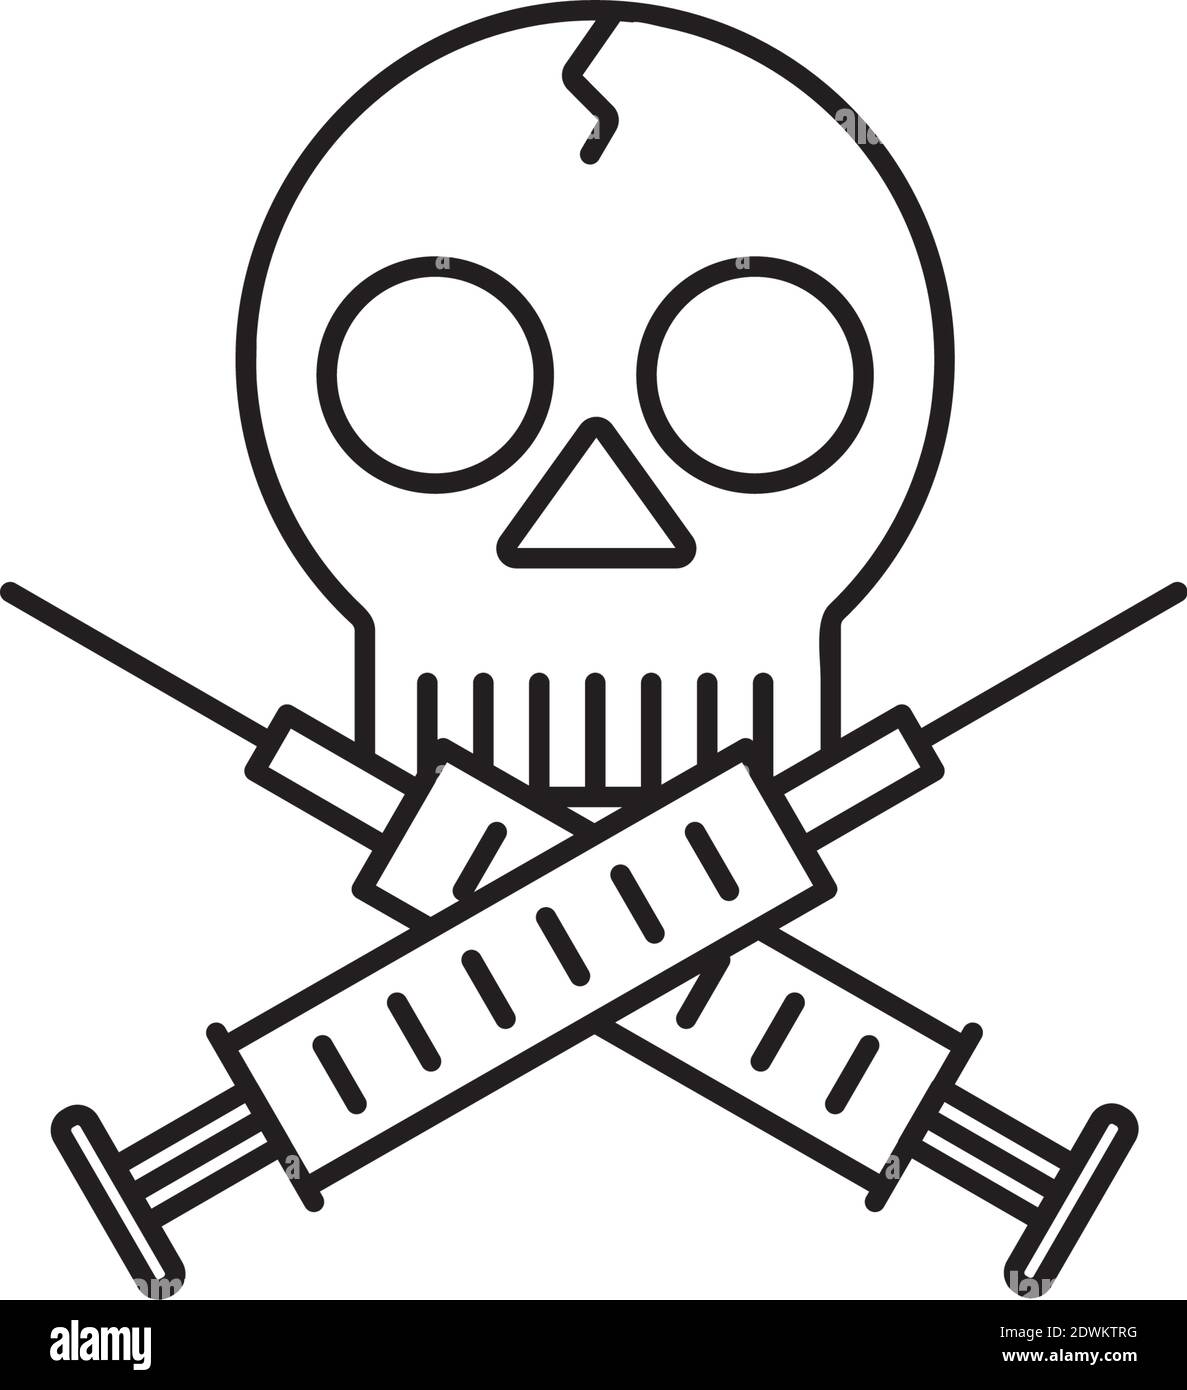 Skull and crossed syringes vectopr line icon, symbol for Overdose Awareness Day on August 31. Stock Vector